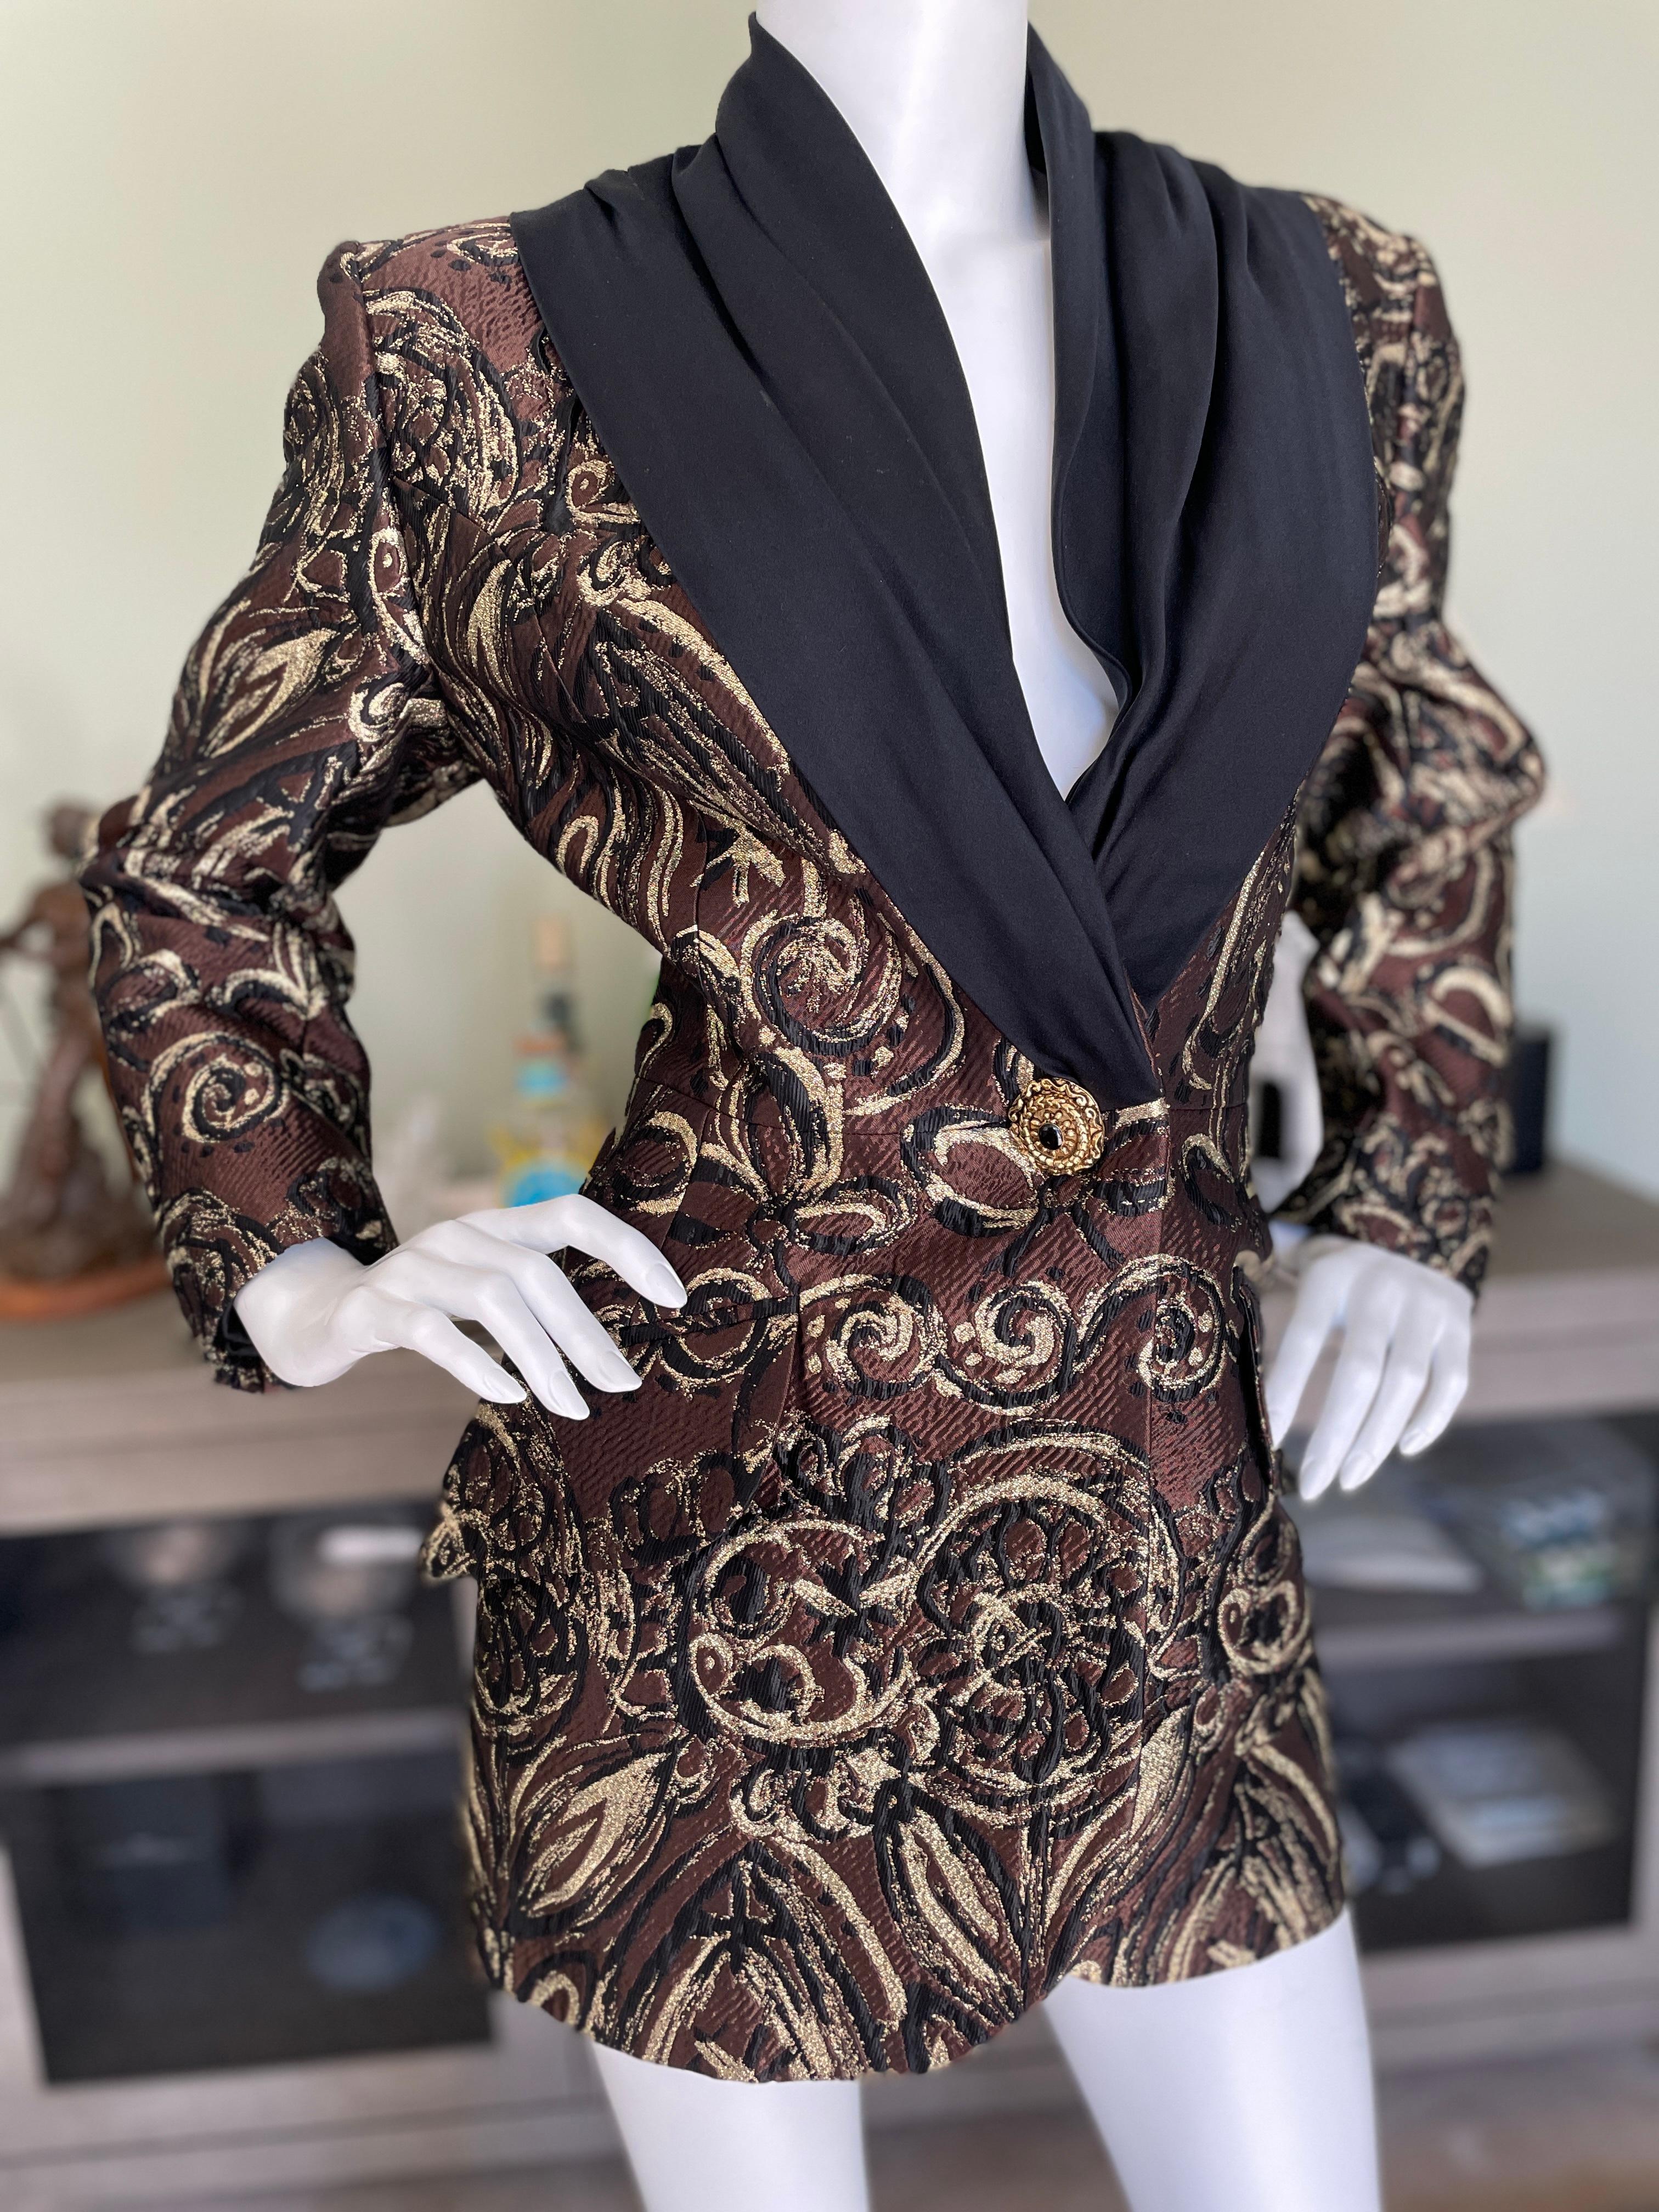 Christian Lacroix Vintage Black and Gold Arlesien Pattern Brocade Jacket In Excellent Condition For Sale In Cloverdale, CA